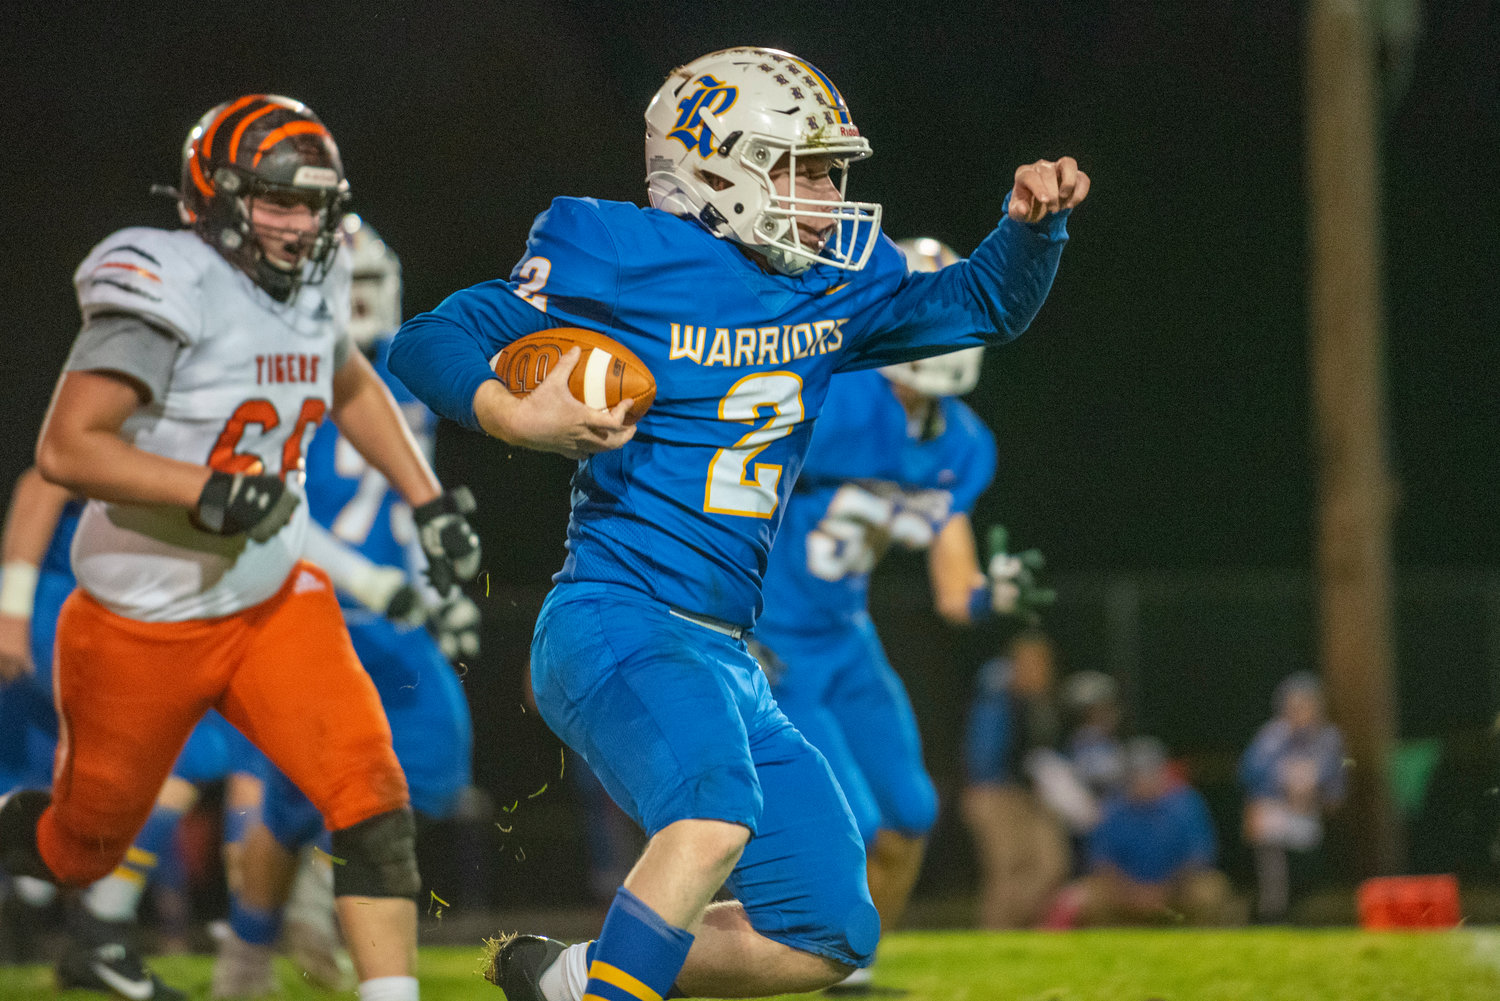 Rochester’s Tate Quarnstrom (2) finds running room against Centralia on Oct. 2, 2021.